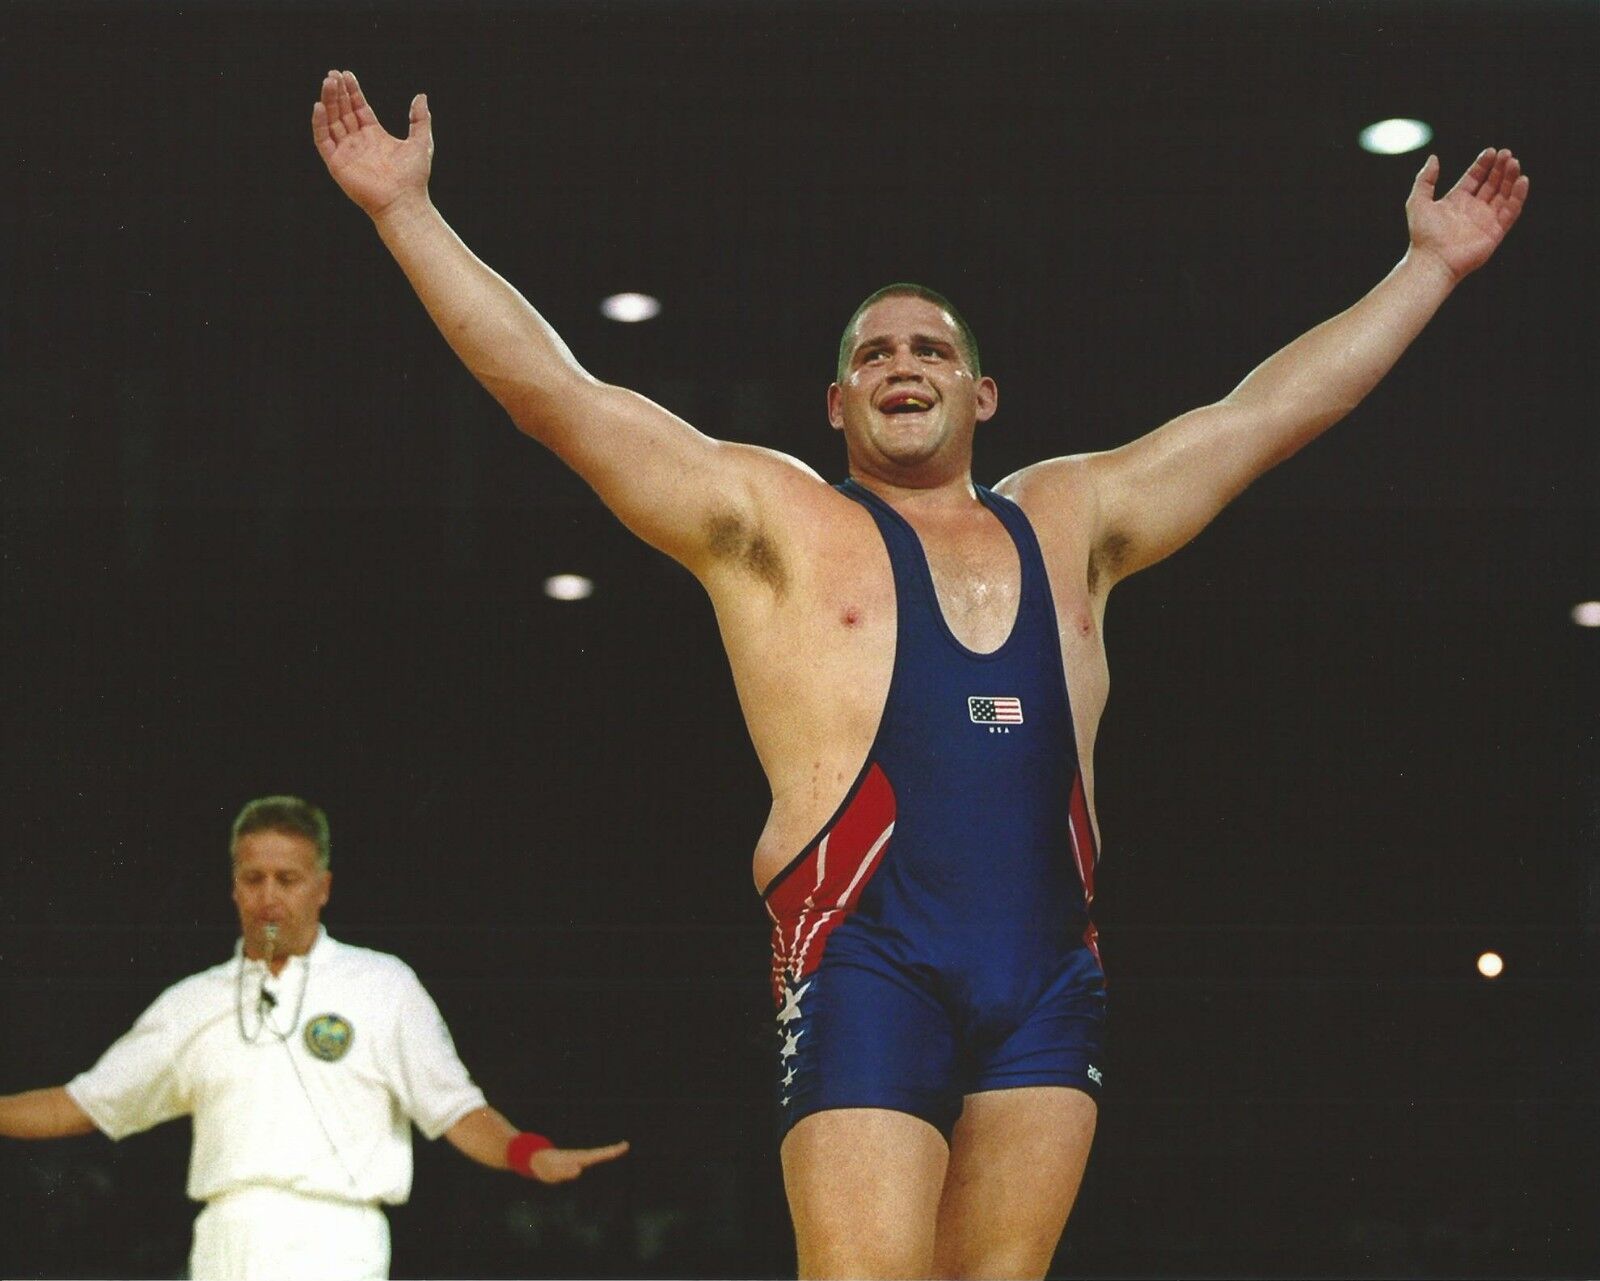 Rulon Gardner 8x10 Photo Poster painting Picture USA 2000 Olympics Wrestling Gold Medal 2004